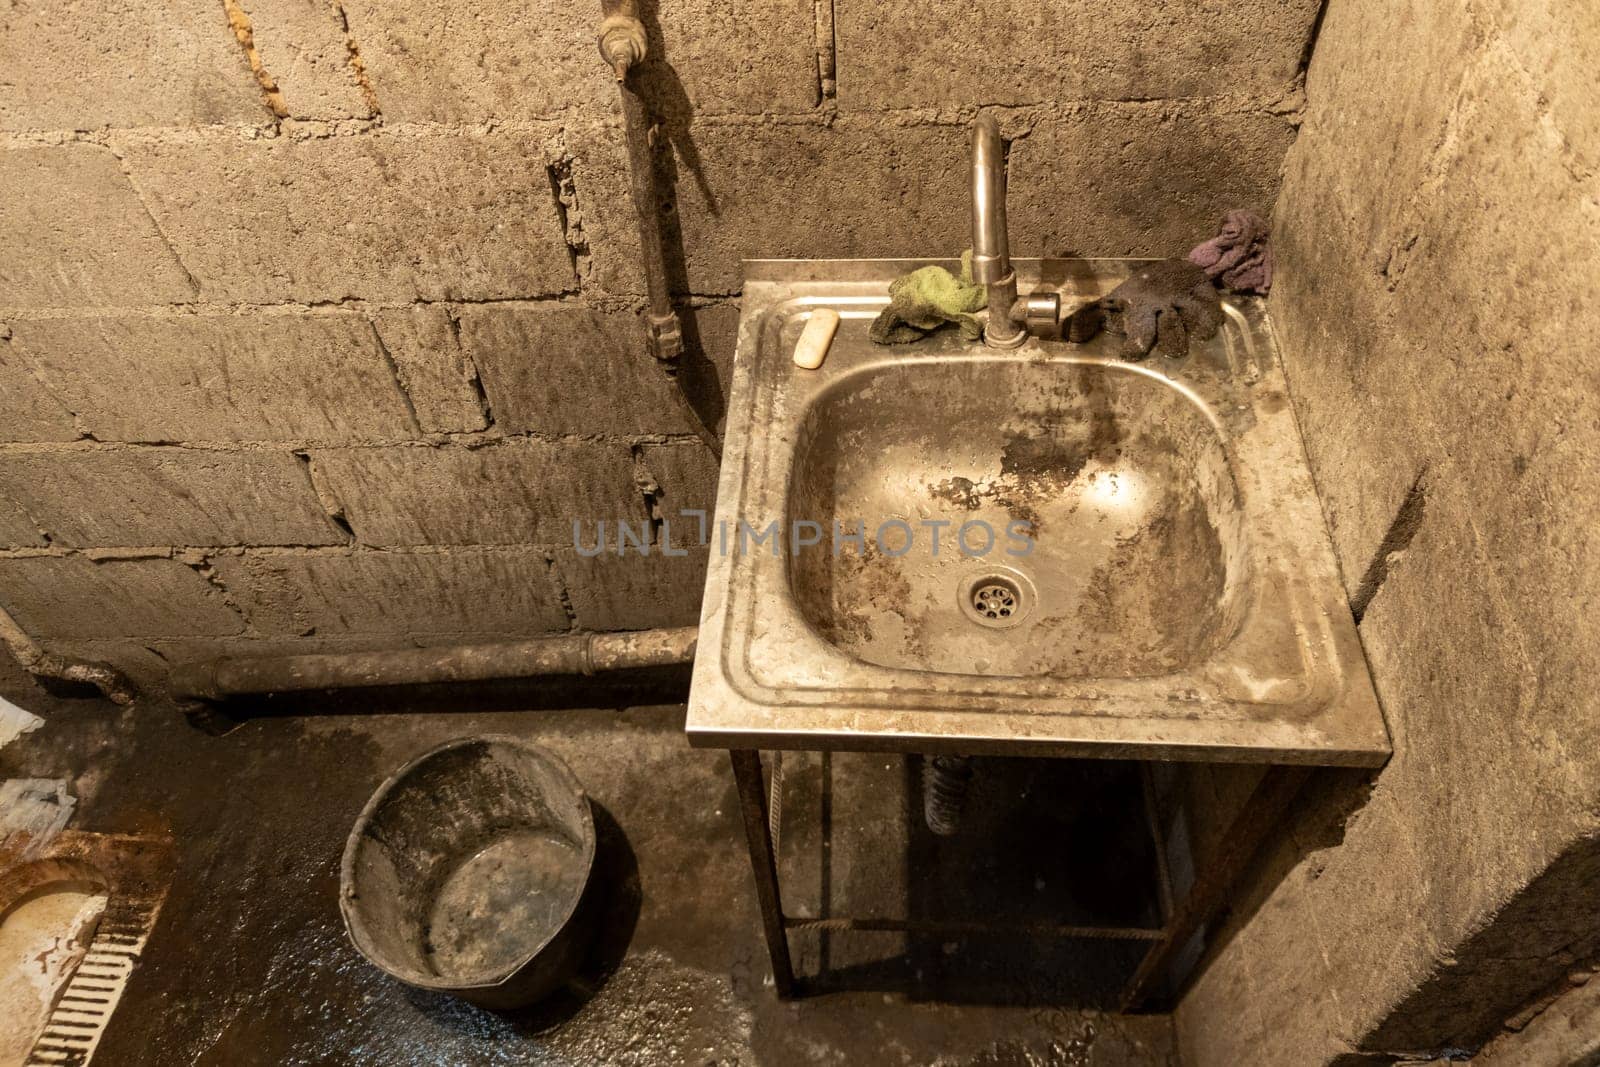 Dirty toilet room stainless steel sink with a bucket on the floor, uncoated concrete flooring and cinder brick walls. by z1b